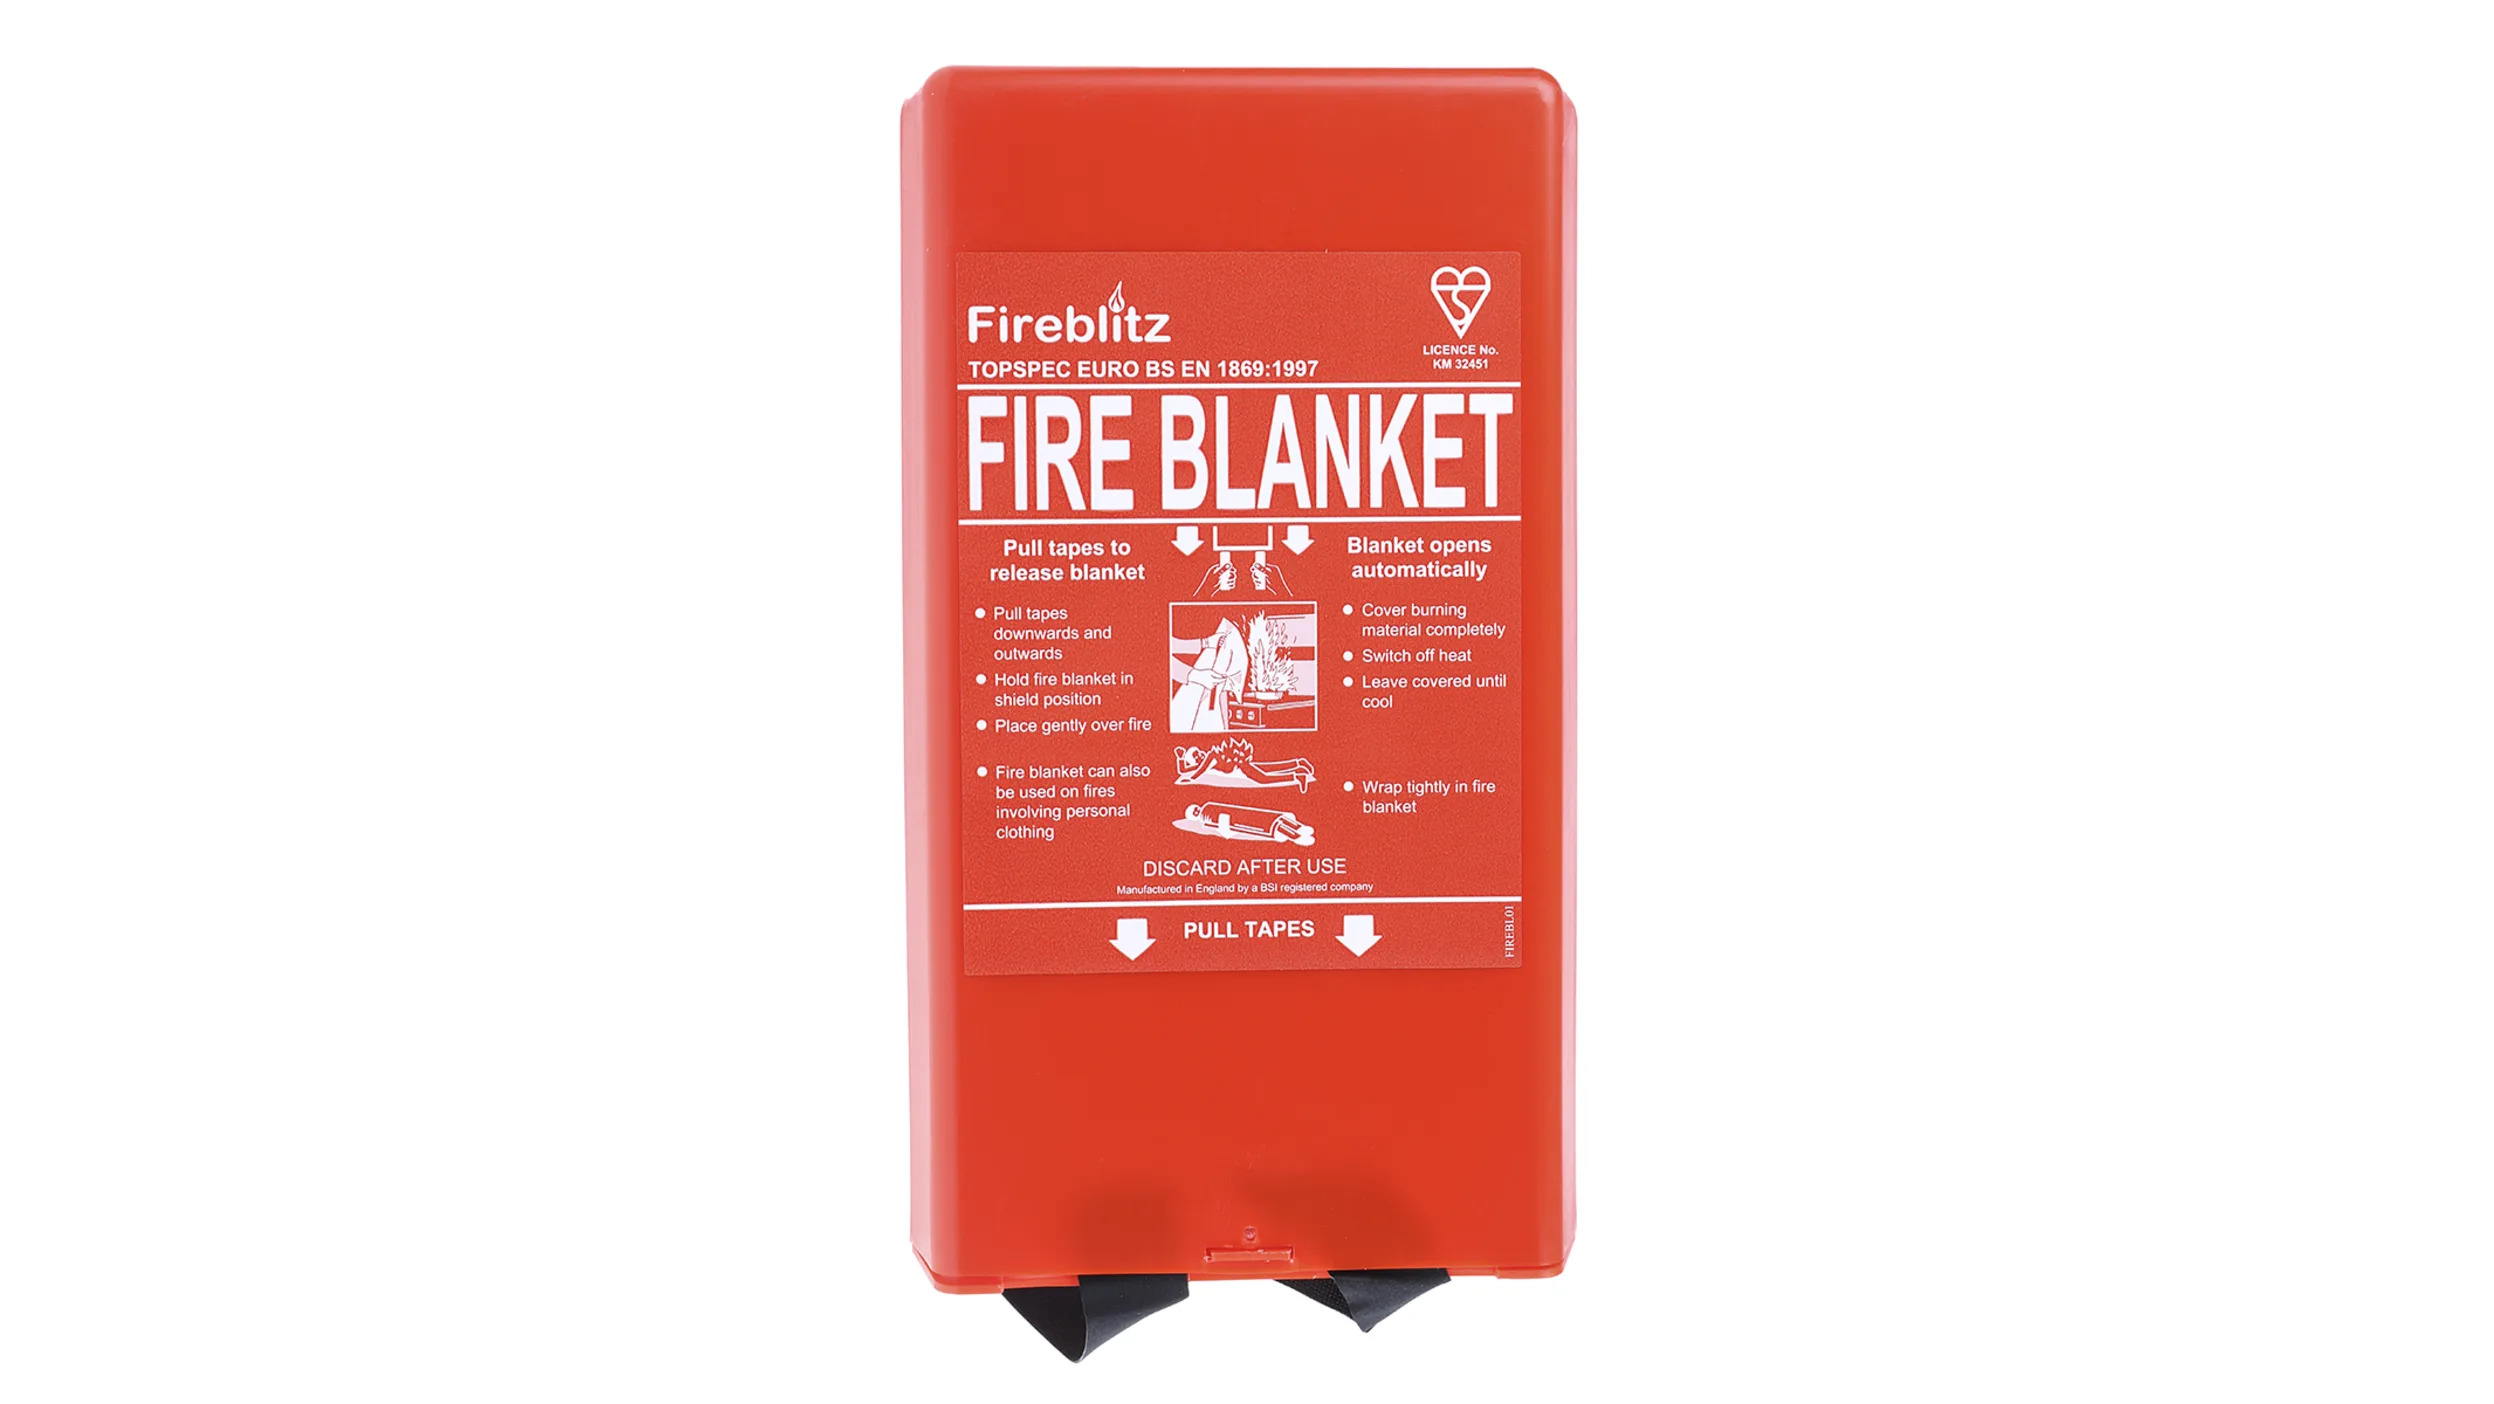 What Is A Fire Blanket Used For?